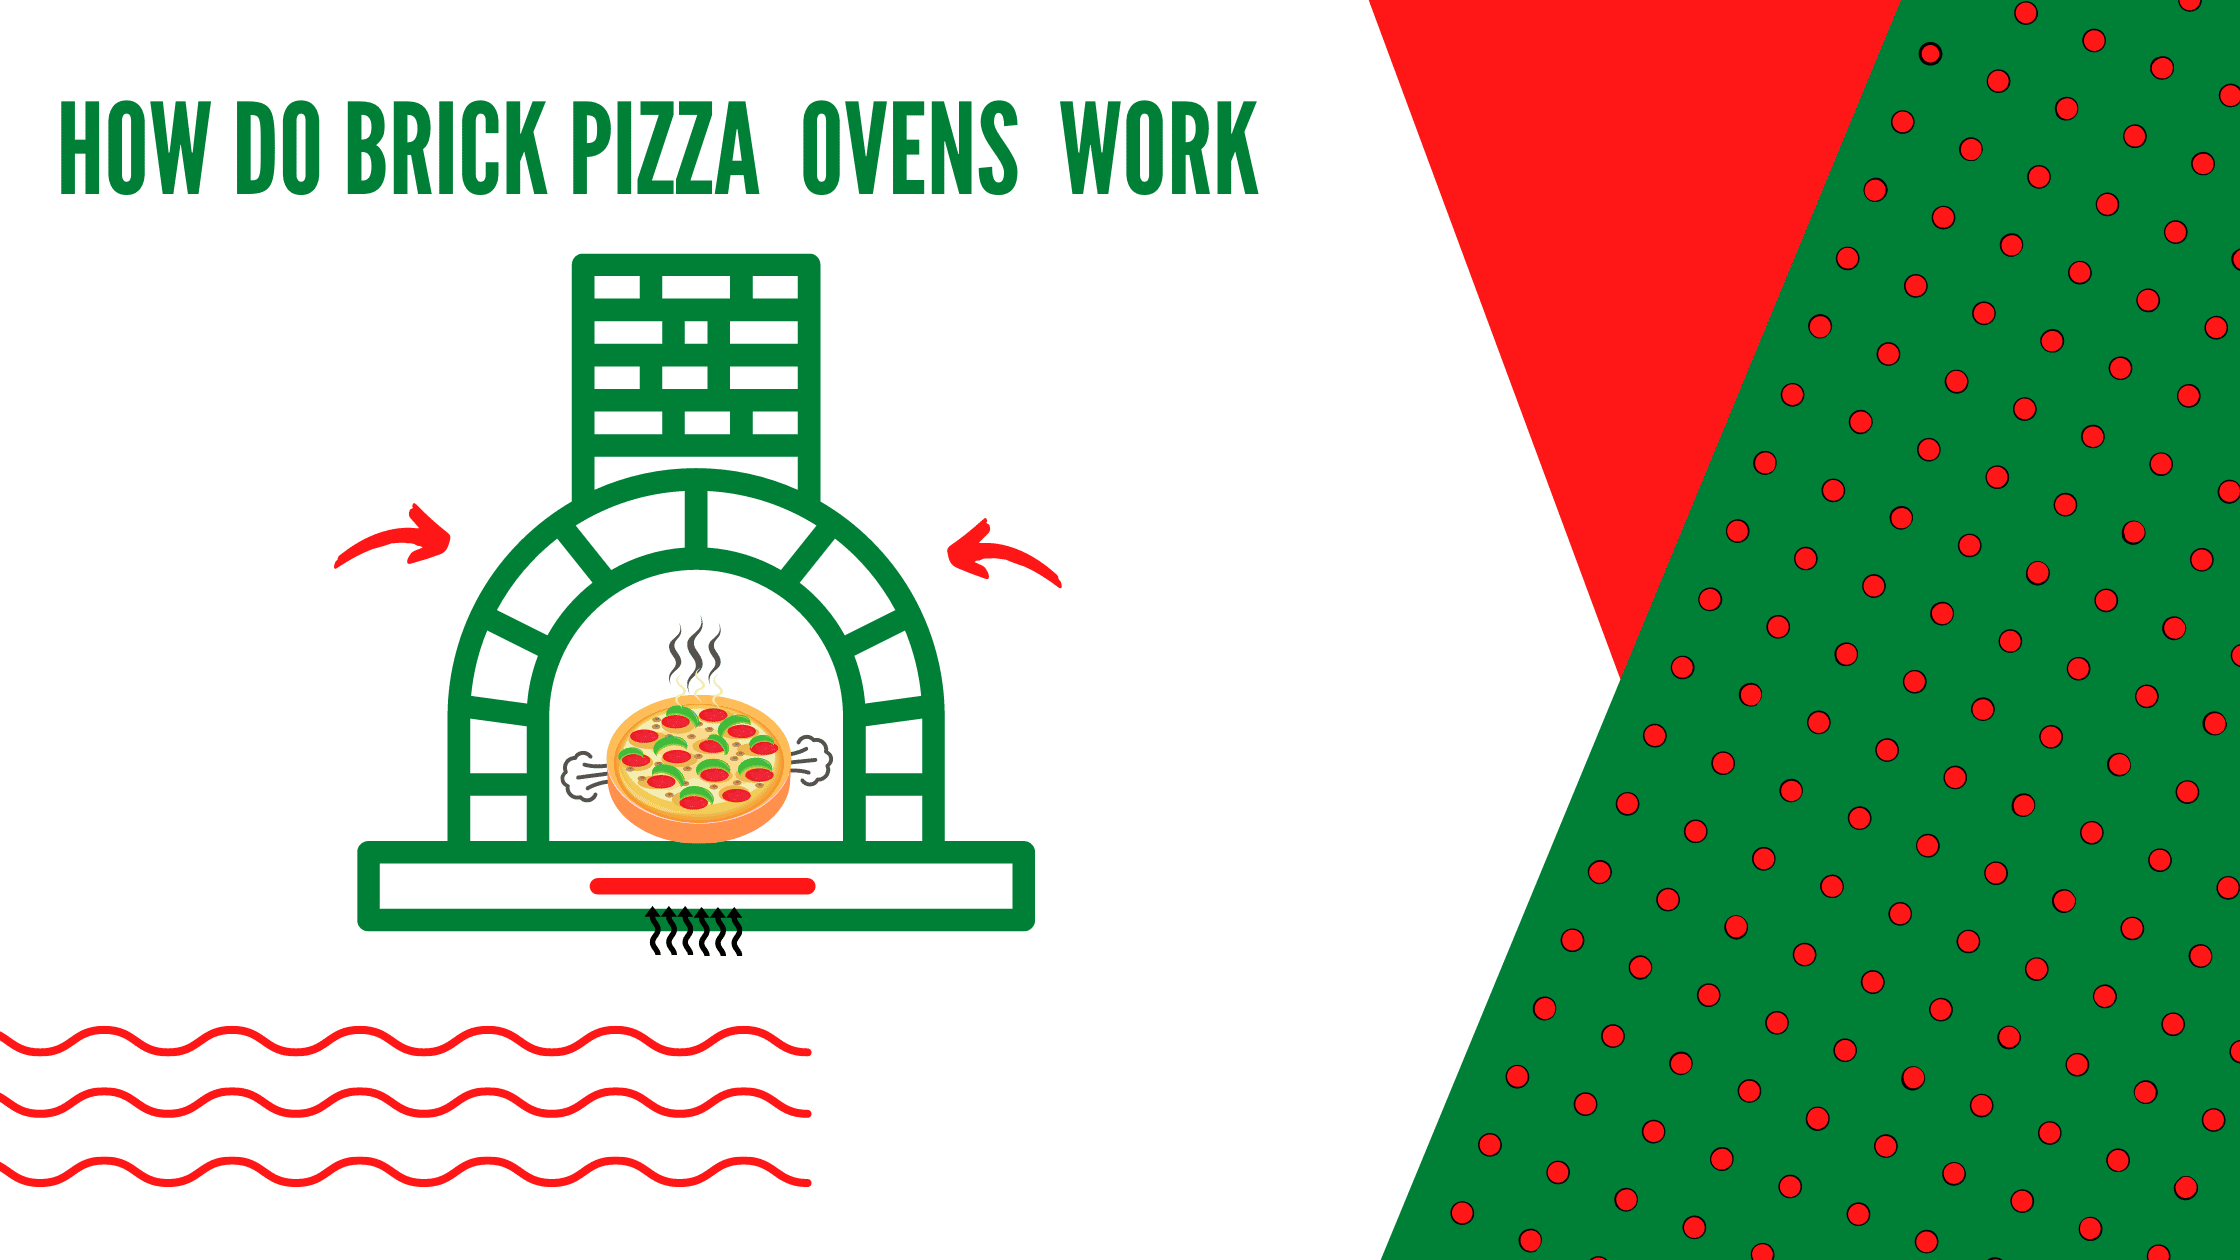 how do brick pizza ovens work infographic